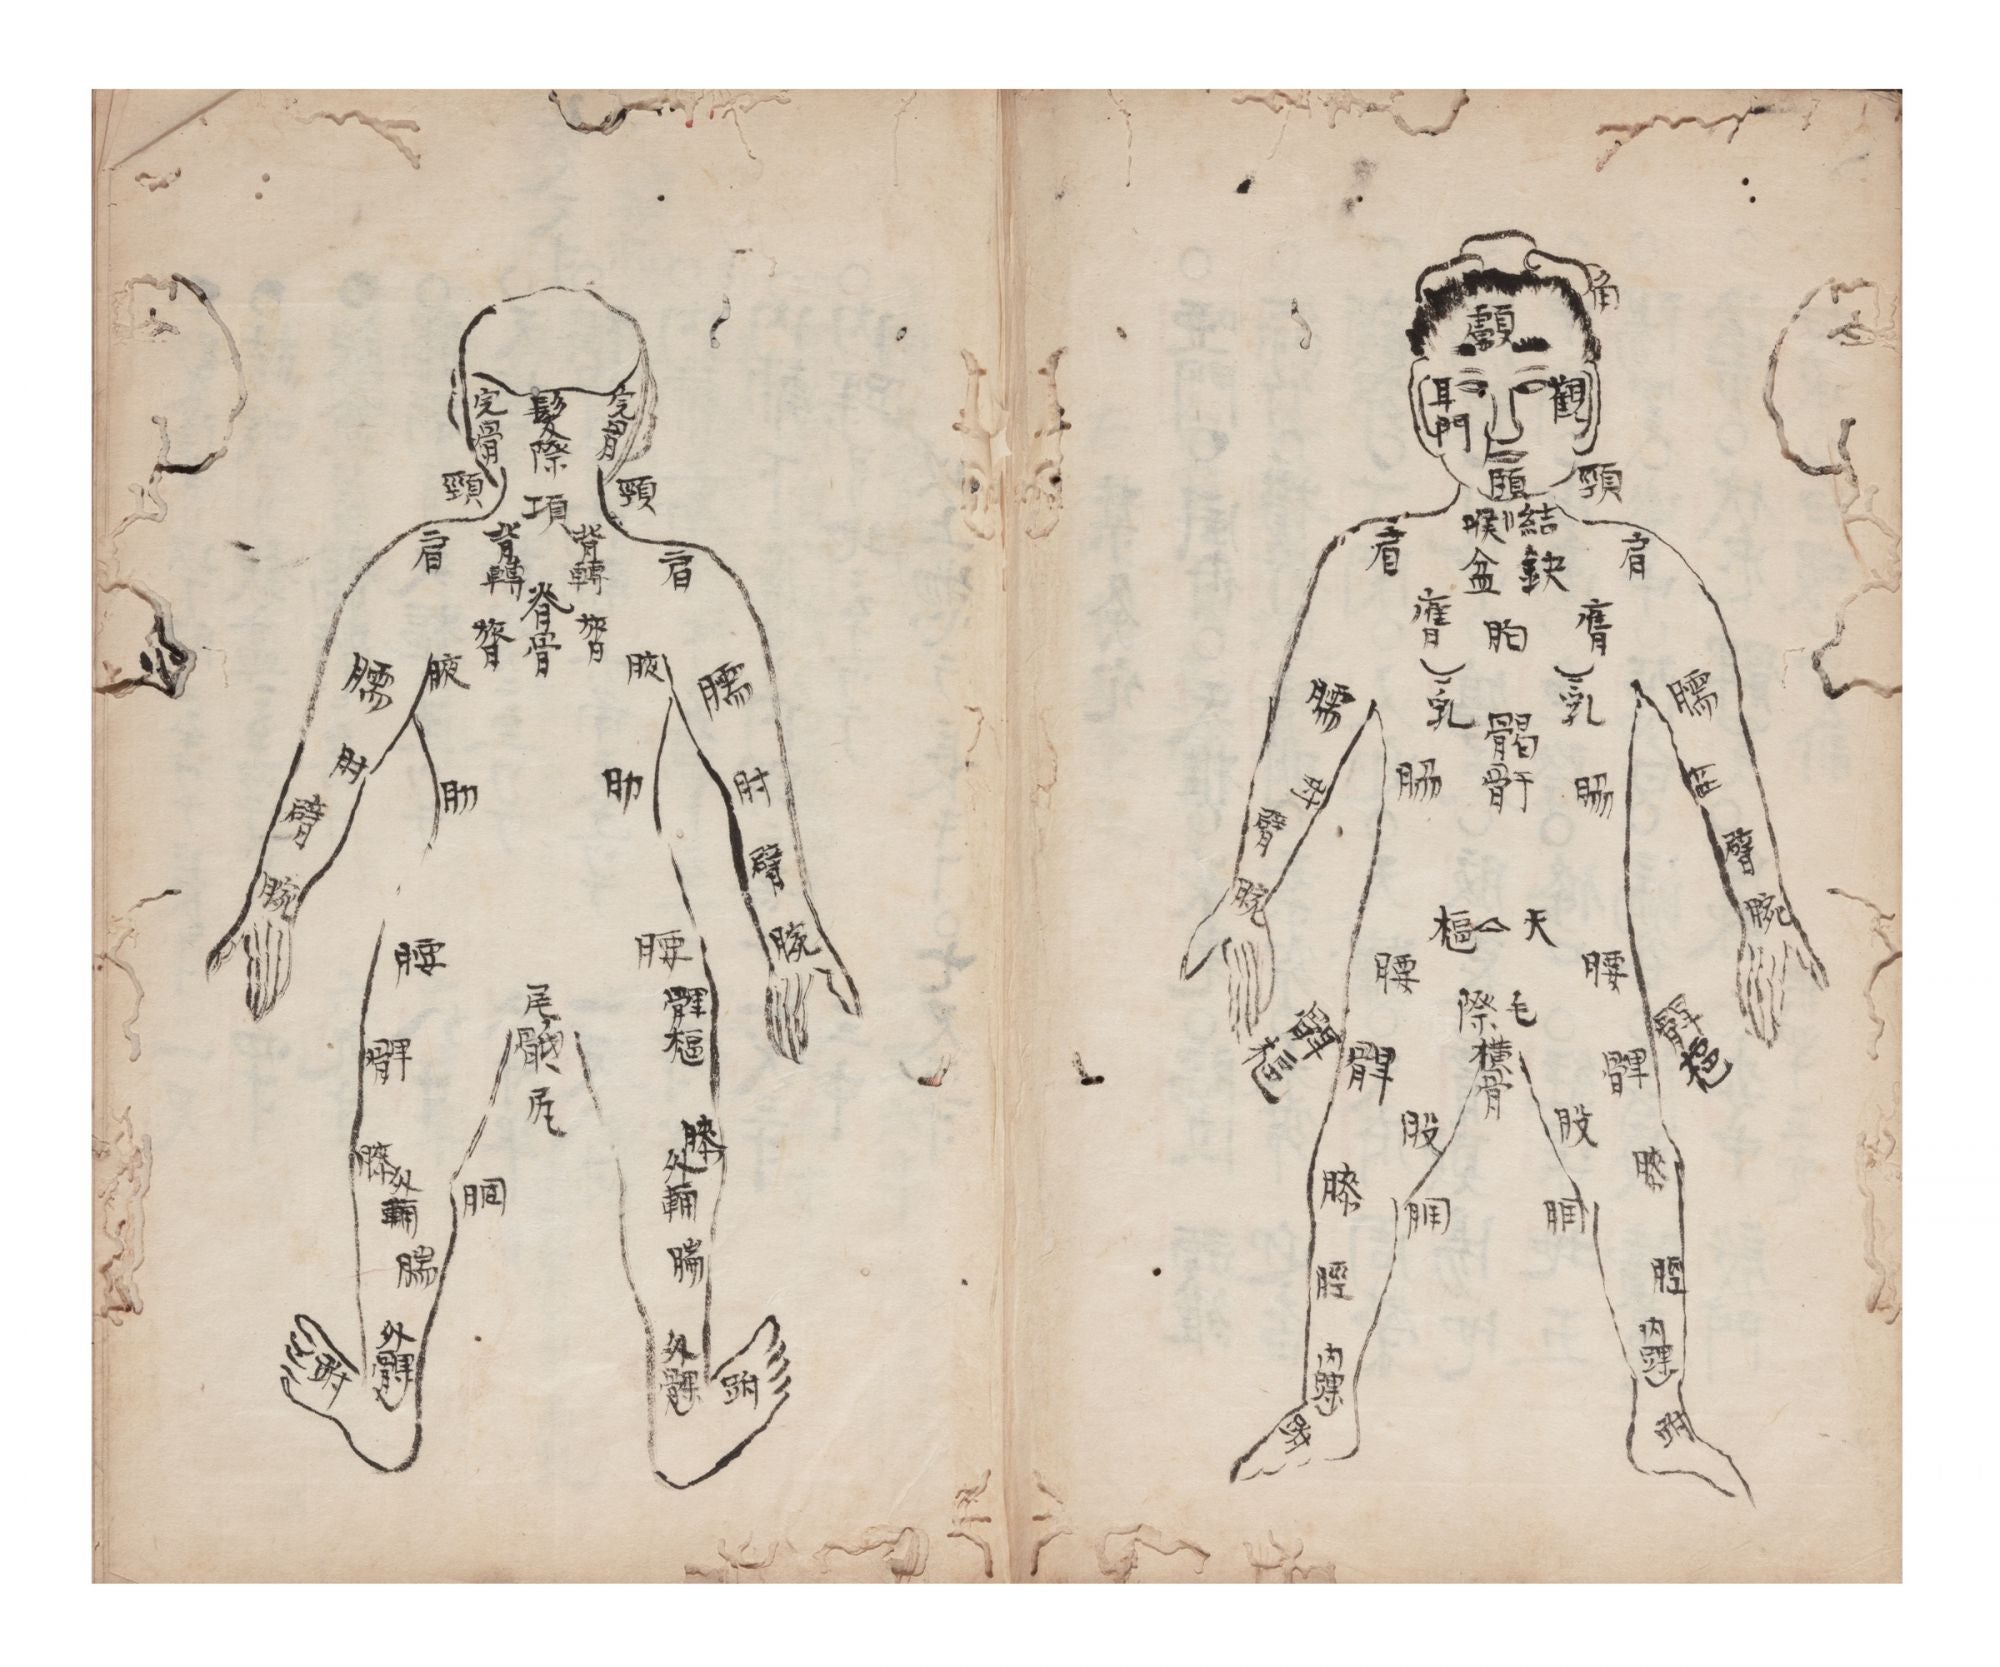 Manuscript on paper, entitled on the label of the upper cover “Kyuketsu  tekiyo” “Acupuncture Pressure Points, Suitable & Precise Usage” by  ACUPUNCTURE 